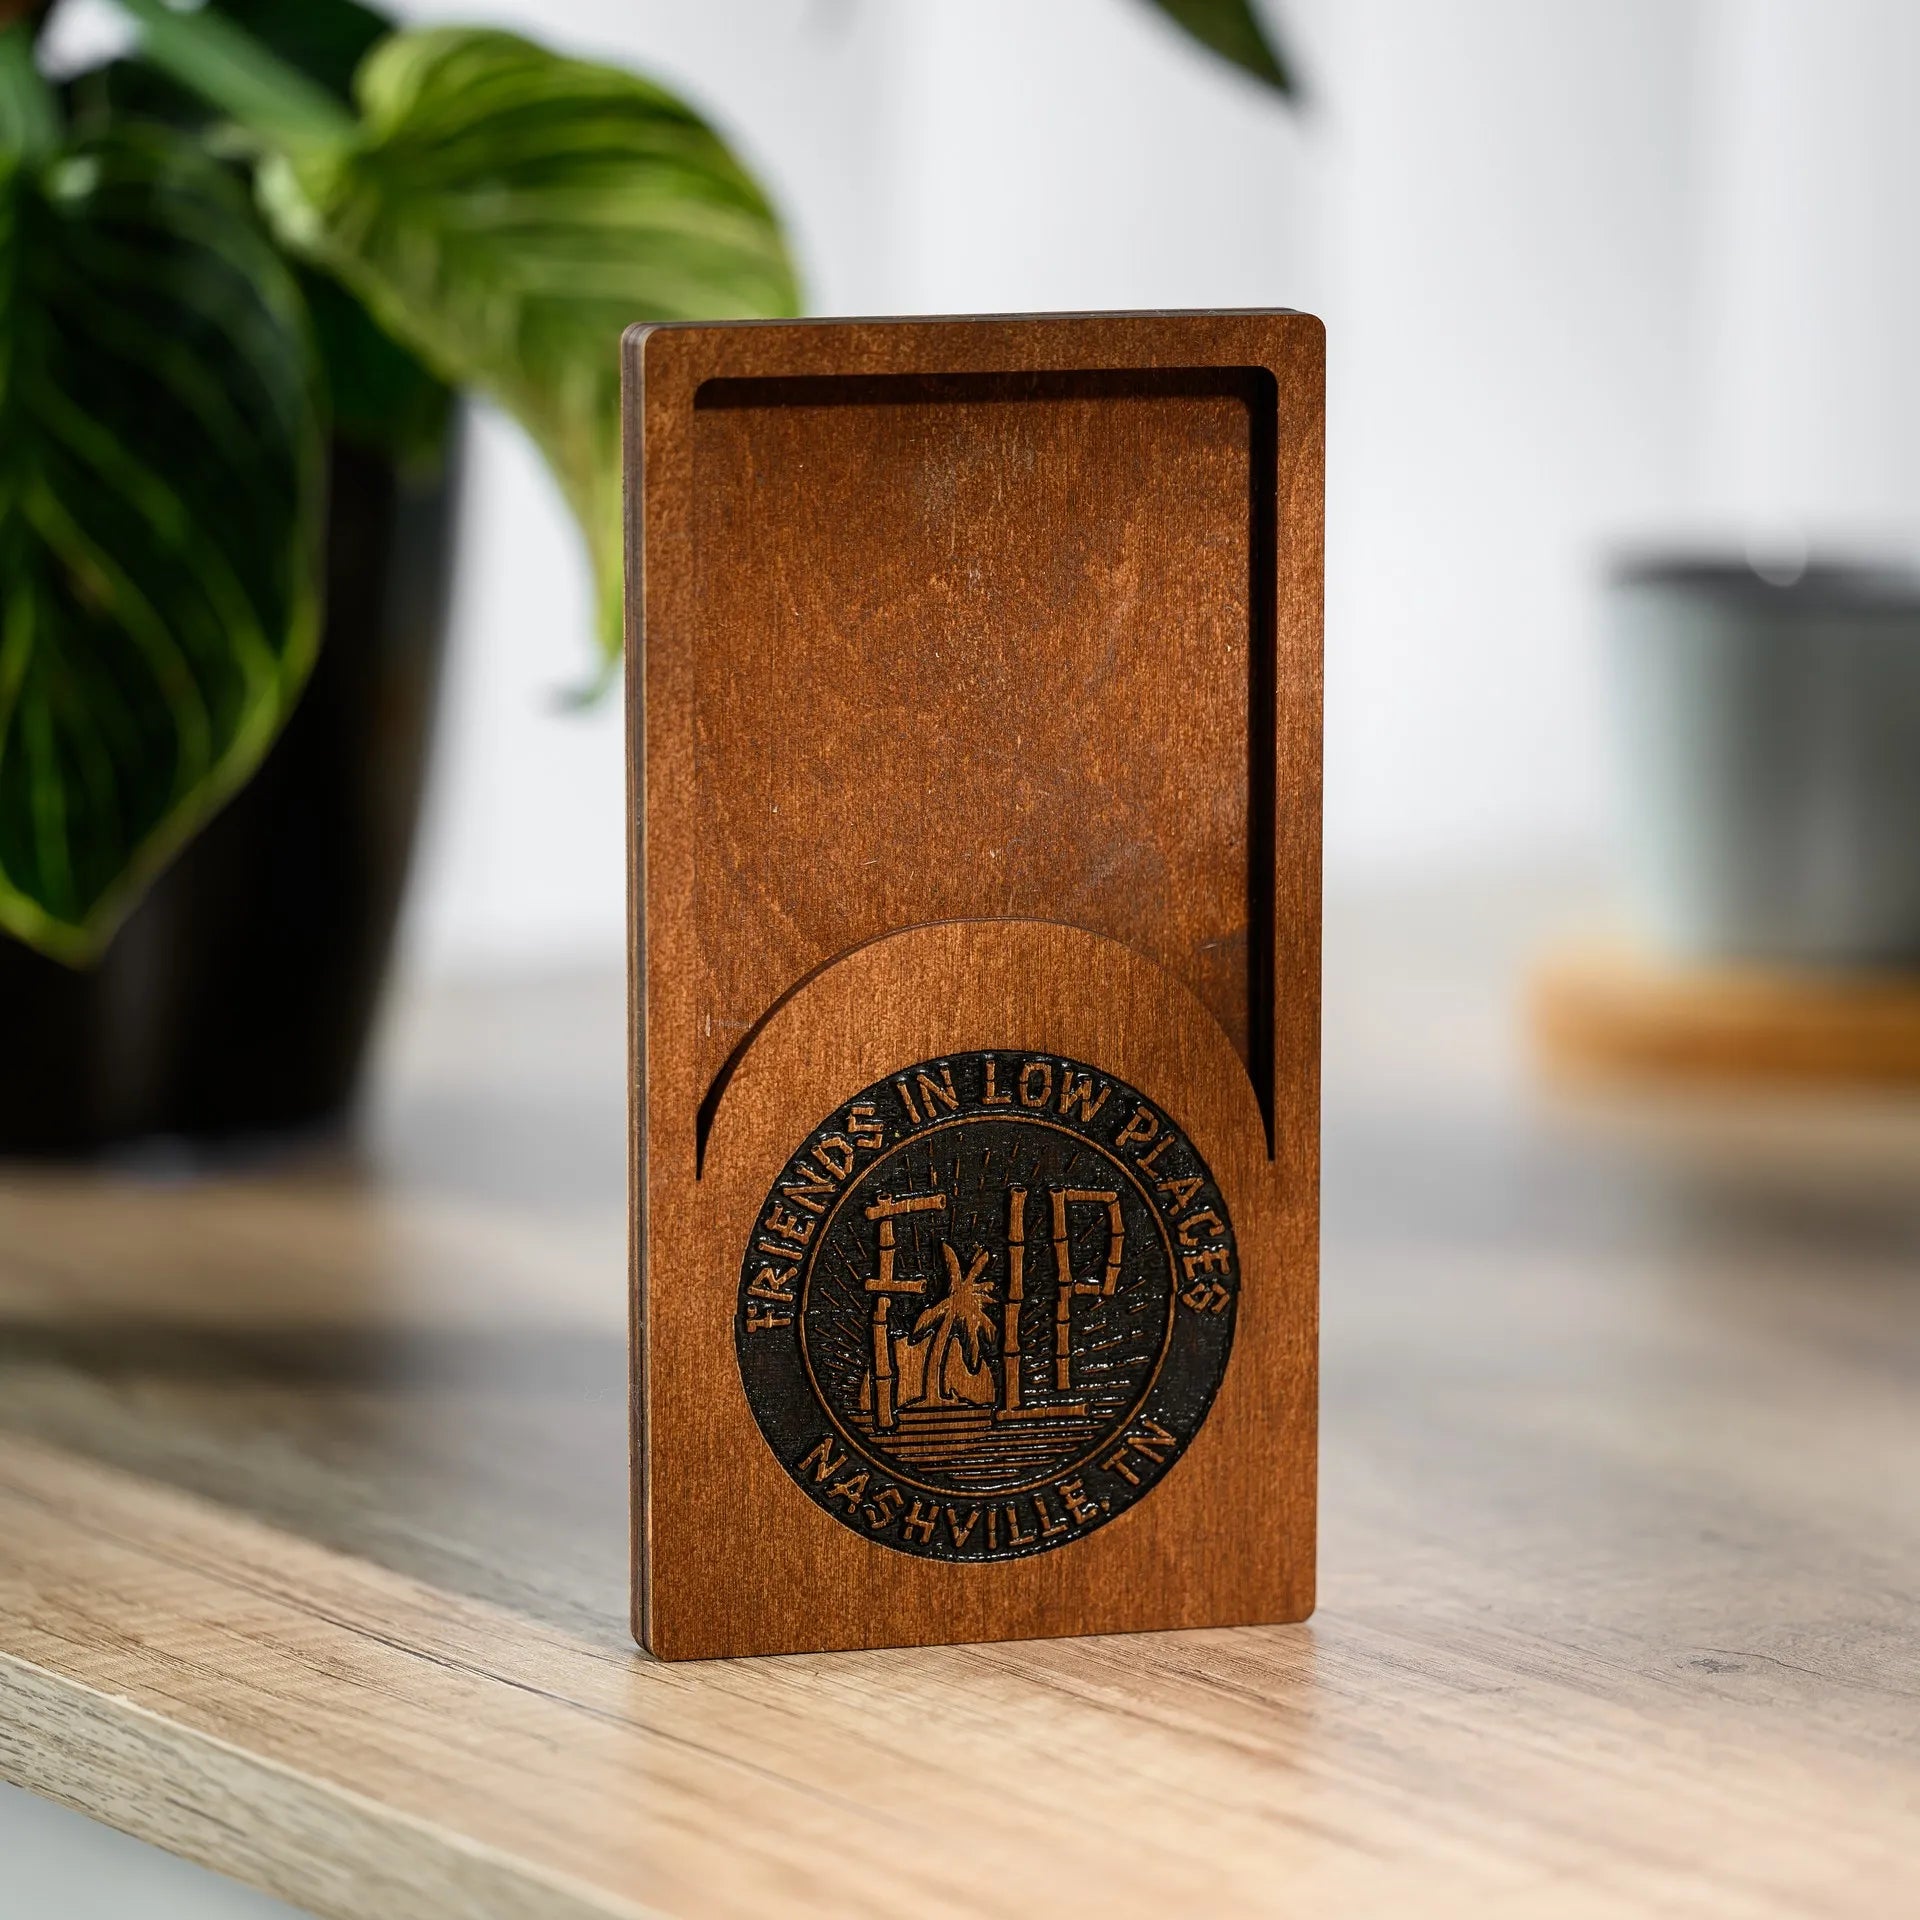 Enhance your dining experience with our classic wooden bill holder, adding a touch of elegance to your table setting.